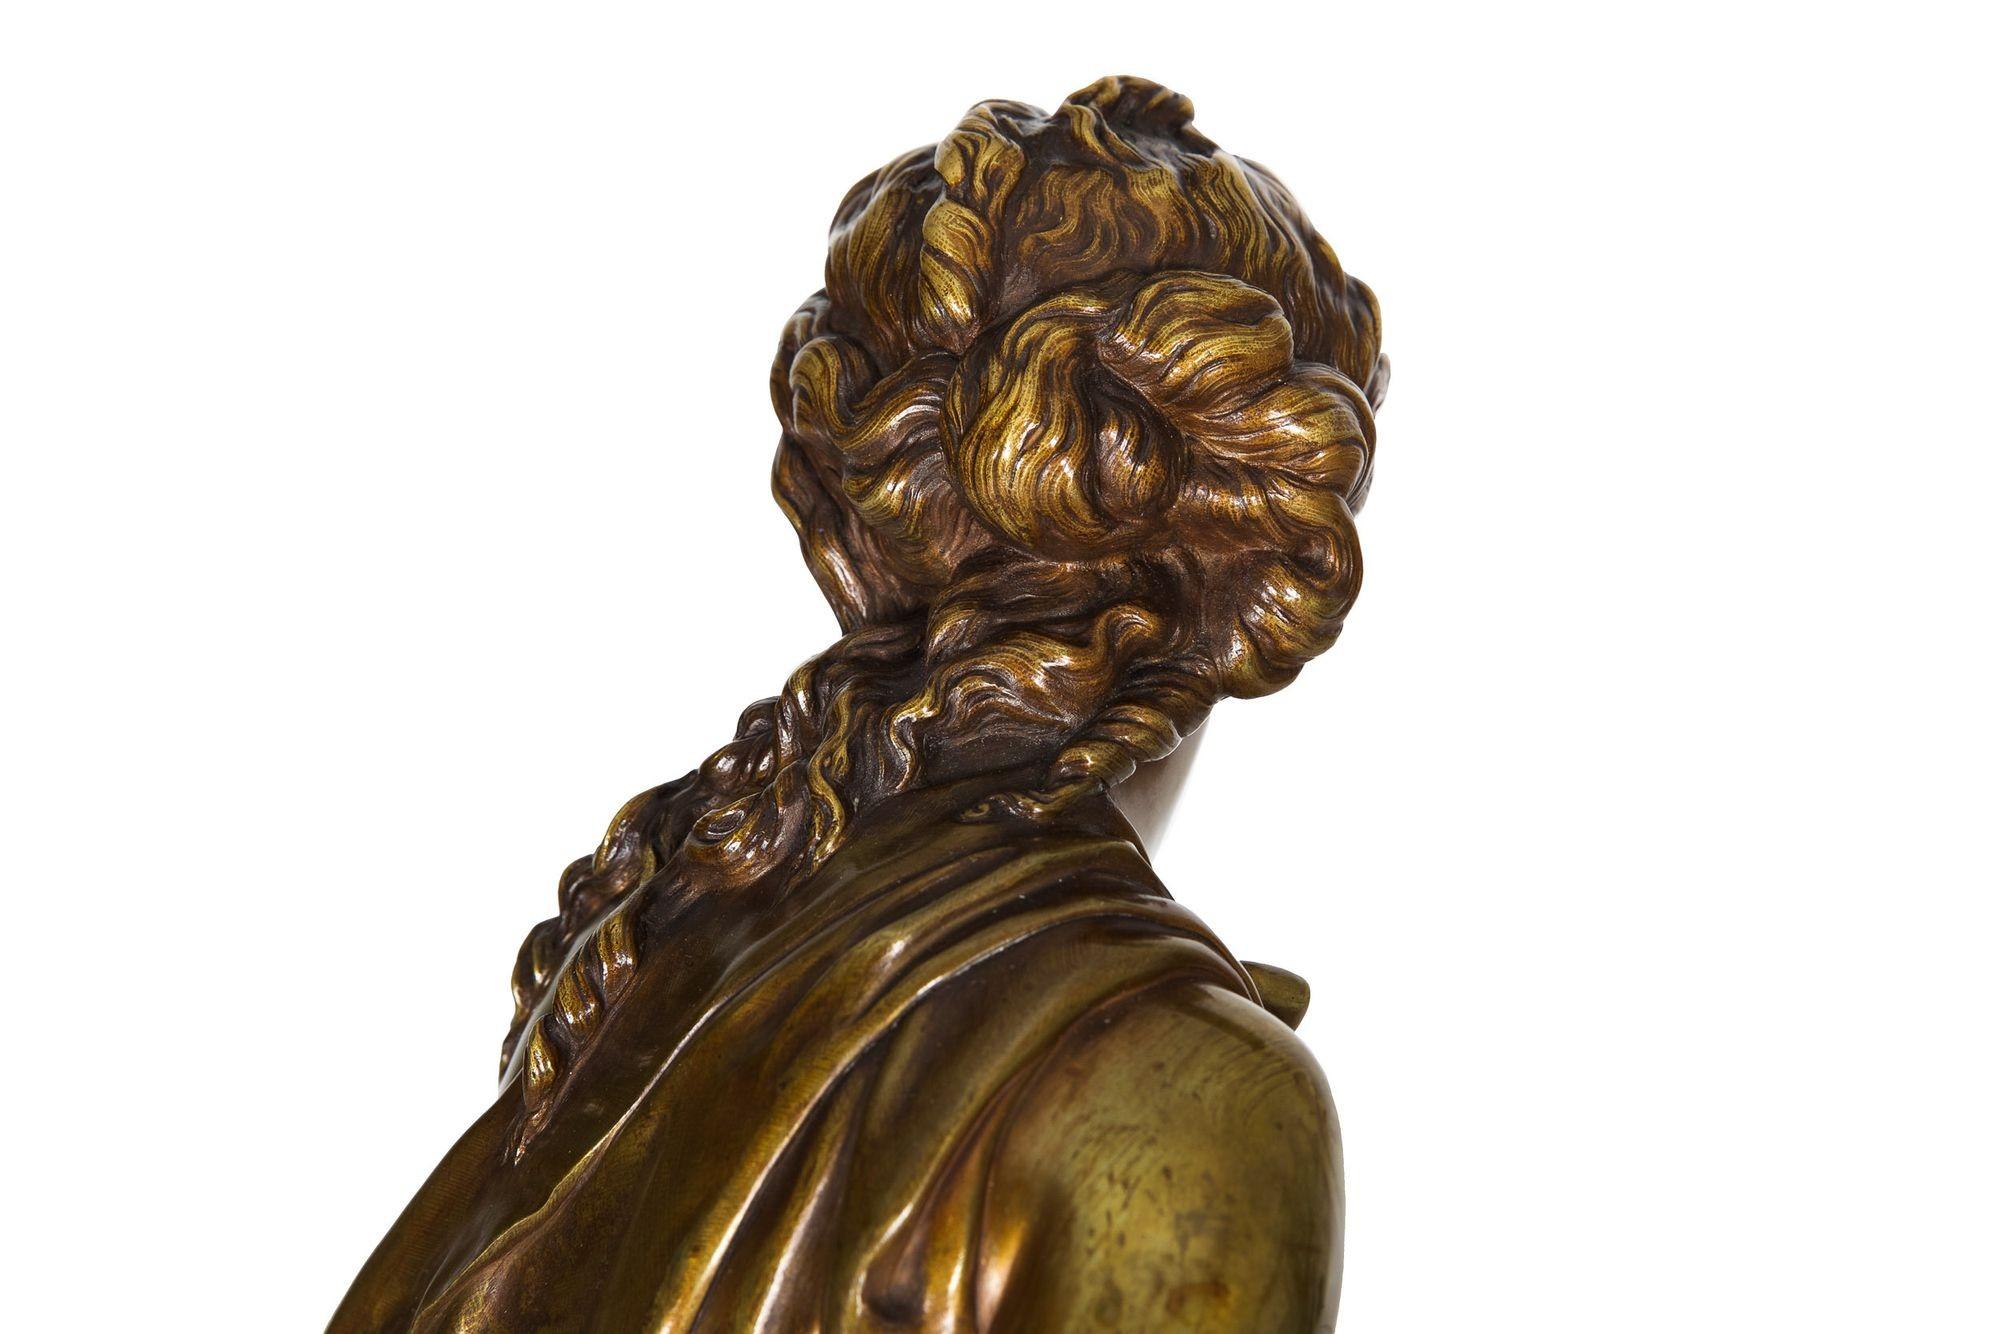 19th Century French Antique Bronze Sculpture “Seated Woman” by Etienne-Henri Dumaige, c.1880 For Sale